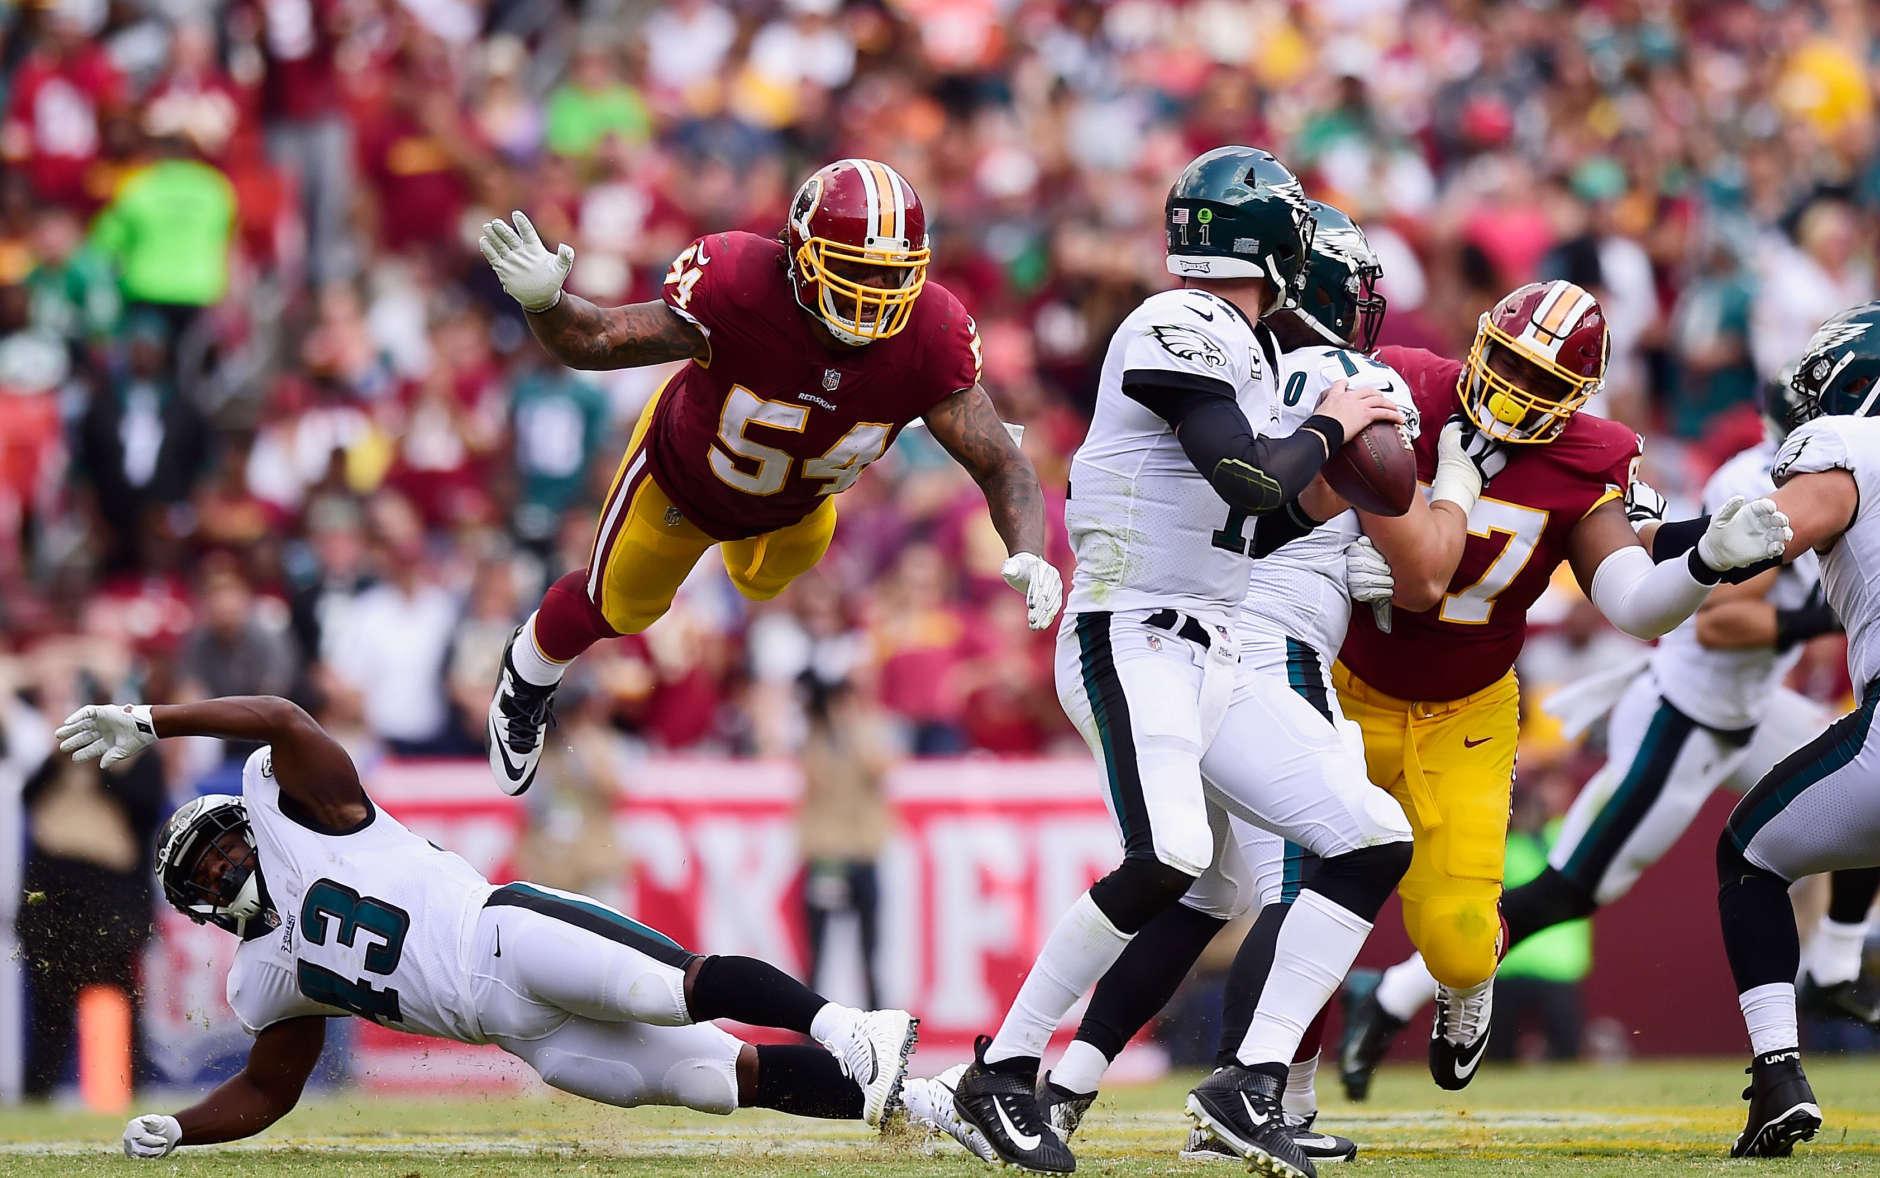 LANDOVER, MD - SEPTEMBER 10: Mason Foster #54 of the Washington Redskins flys in the air to tackle Quarterback Carson Wentz #11 of the Philadelphia Eagles in the fourth quarter at FedExField on September 10, 2017 in Landover, Maryland.  (Photo by Patrick McDermott/Getty Images)